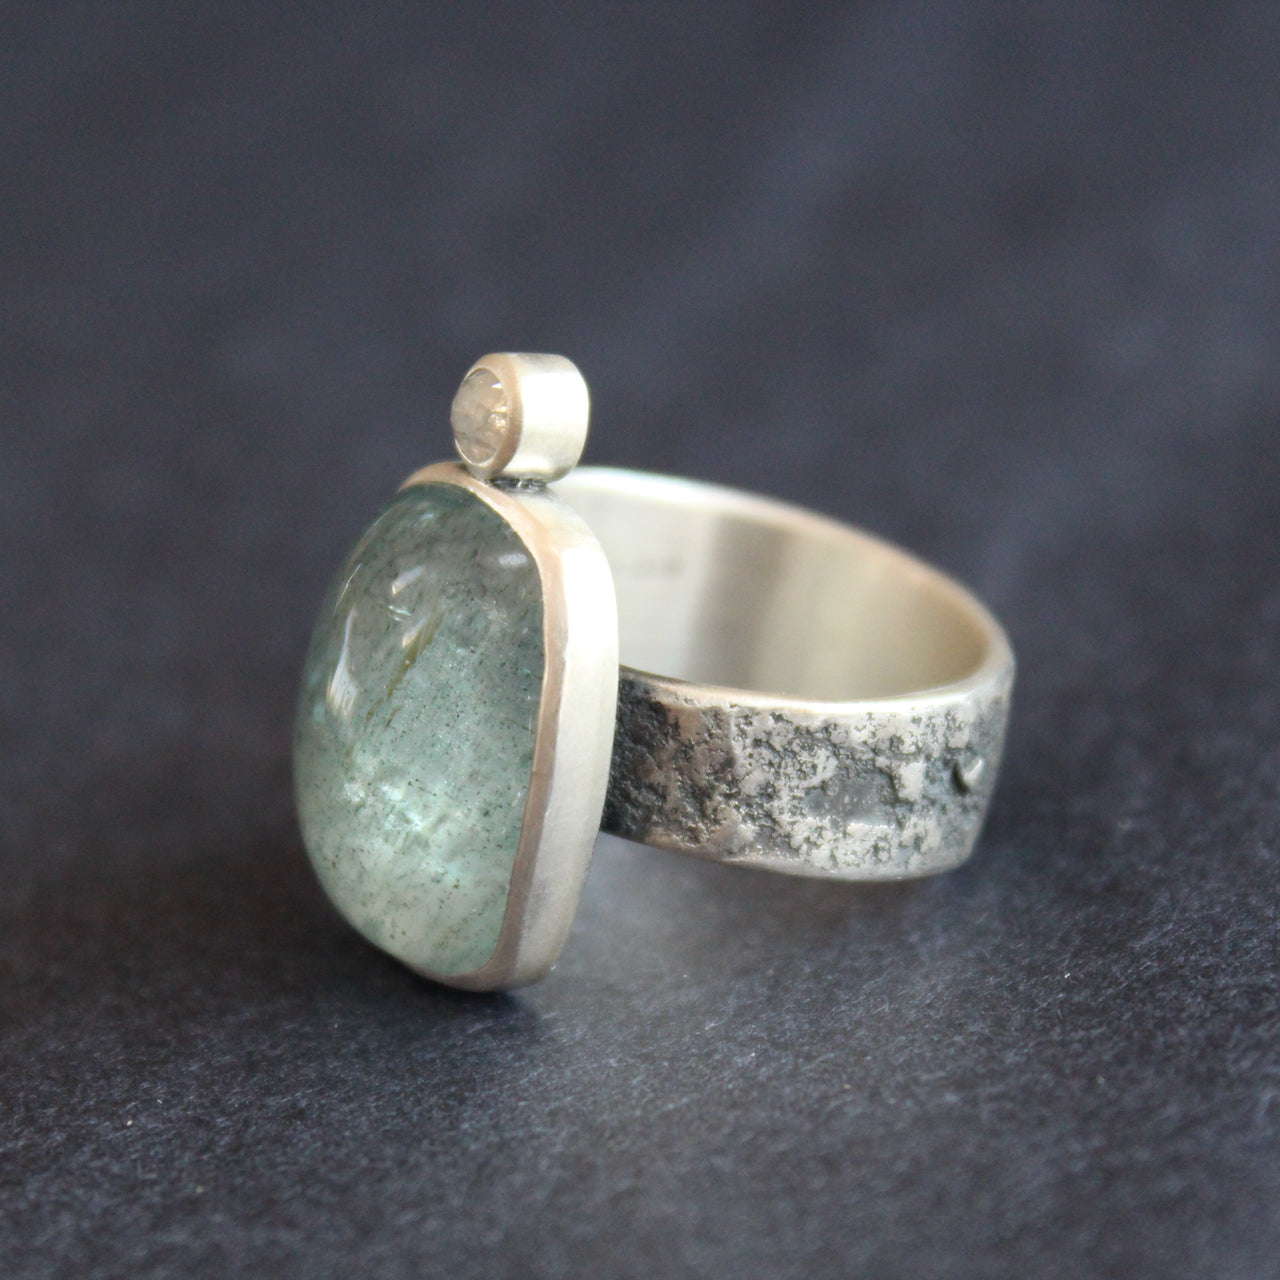 silver ring with a pale blue aquamarine stone and smaller diamond on a textured silver band by Cornwall jeweller Carin Lindberg